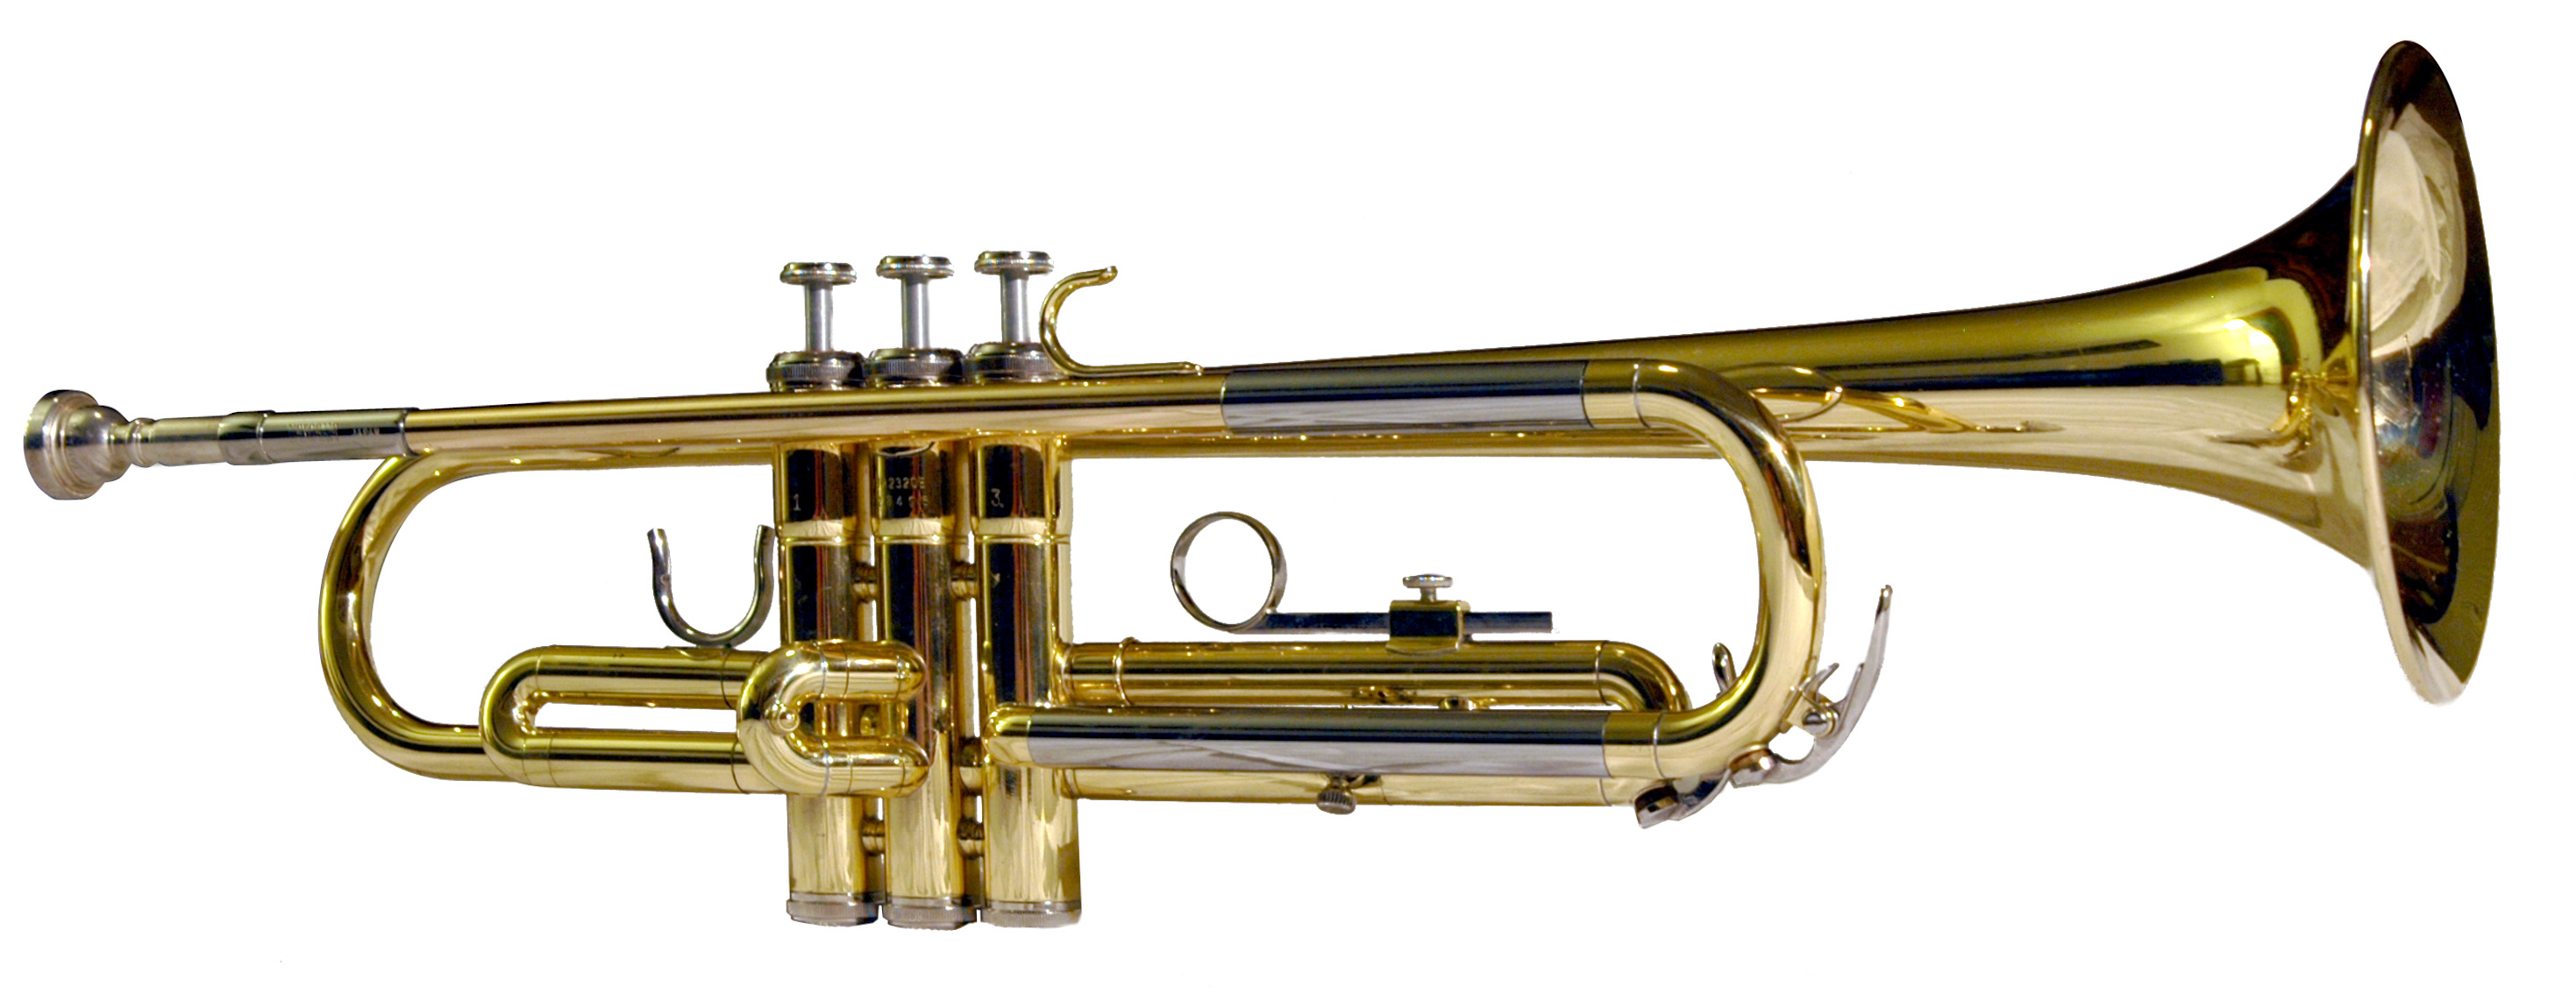 Images of Trumpet | 2938x1150